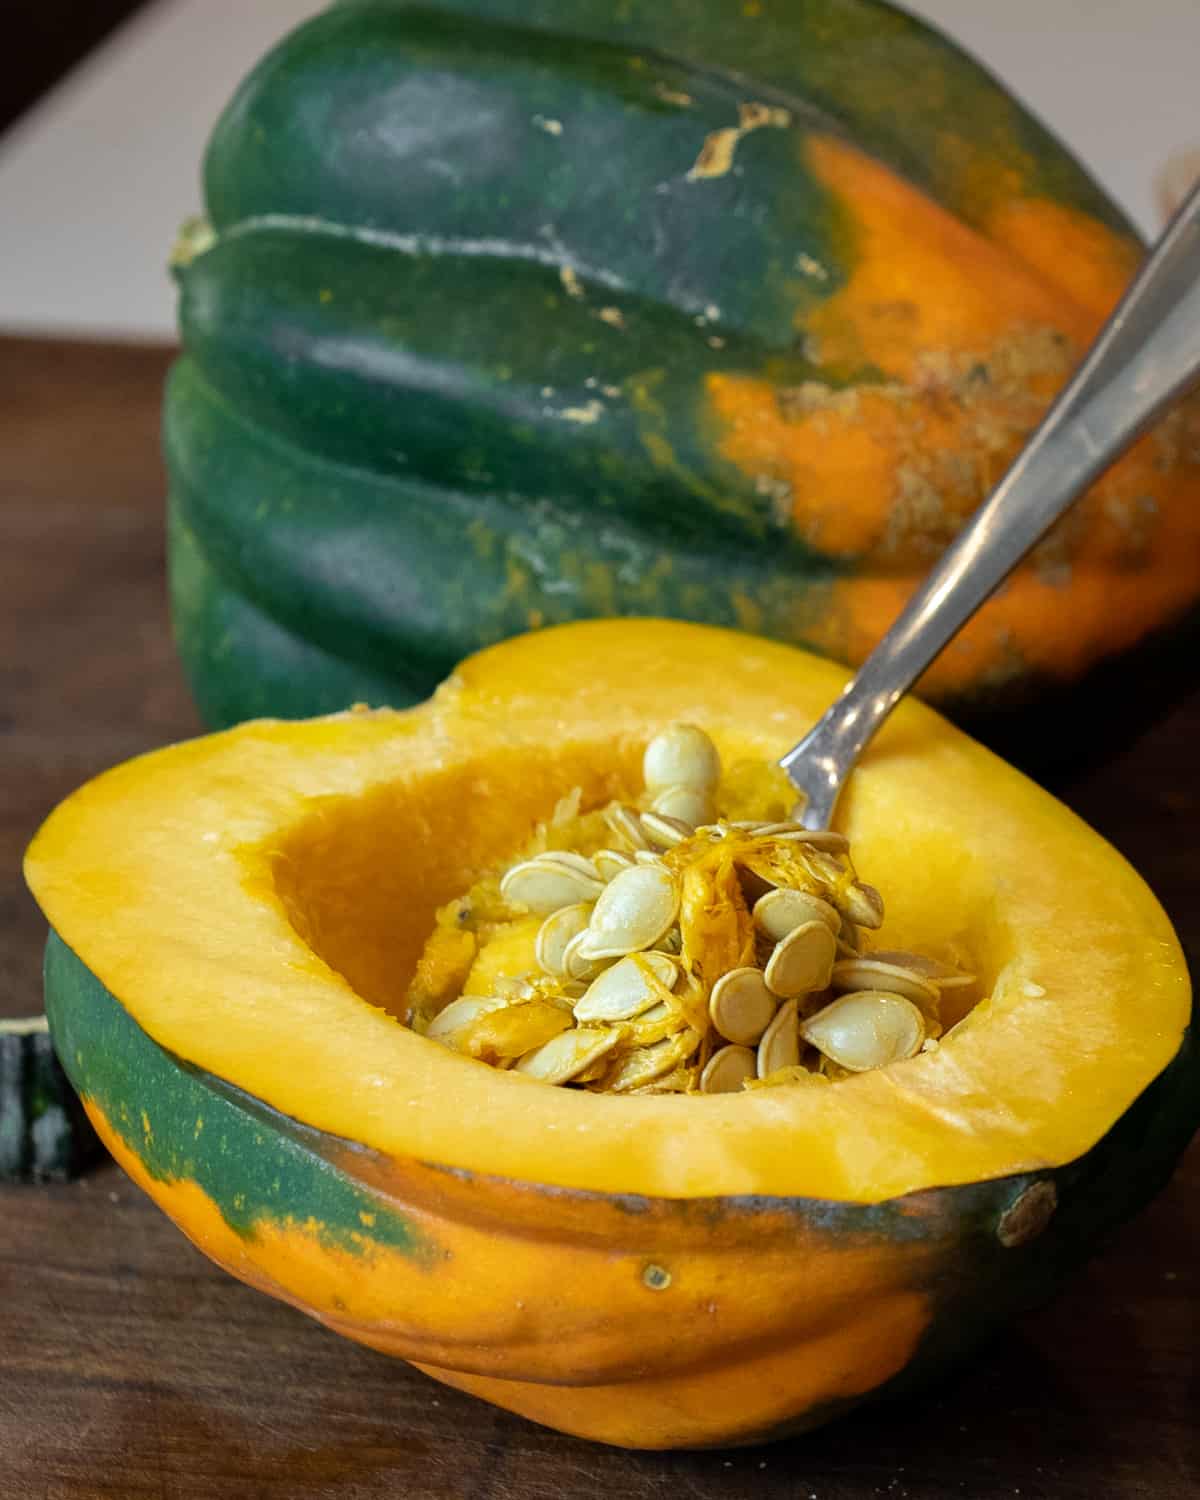 Seeds being scooped out of an acorn squash.